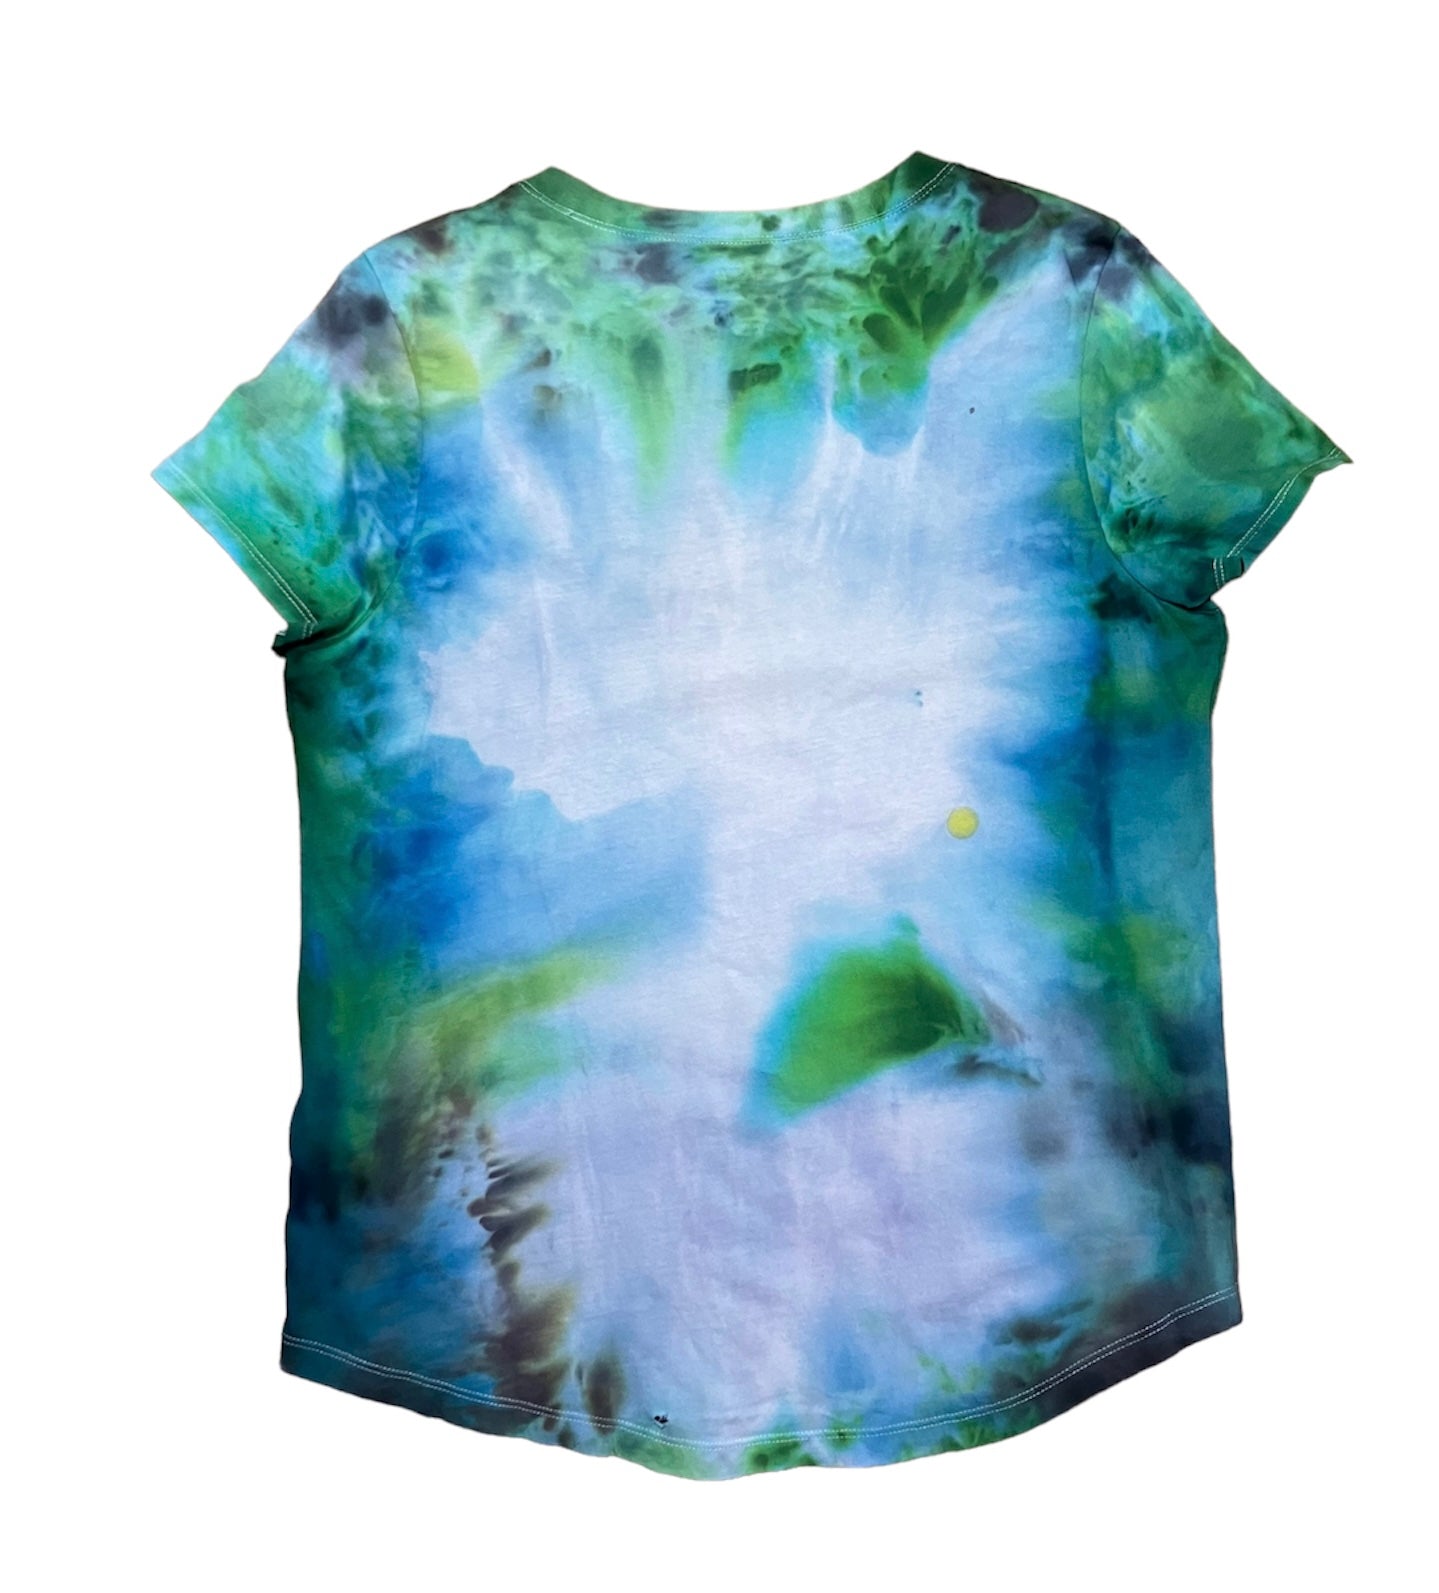 Reflected Sun tiedyed recycled t-shirt, size M